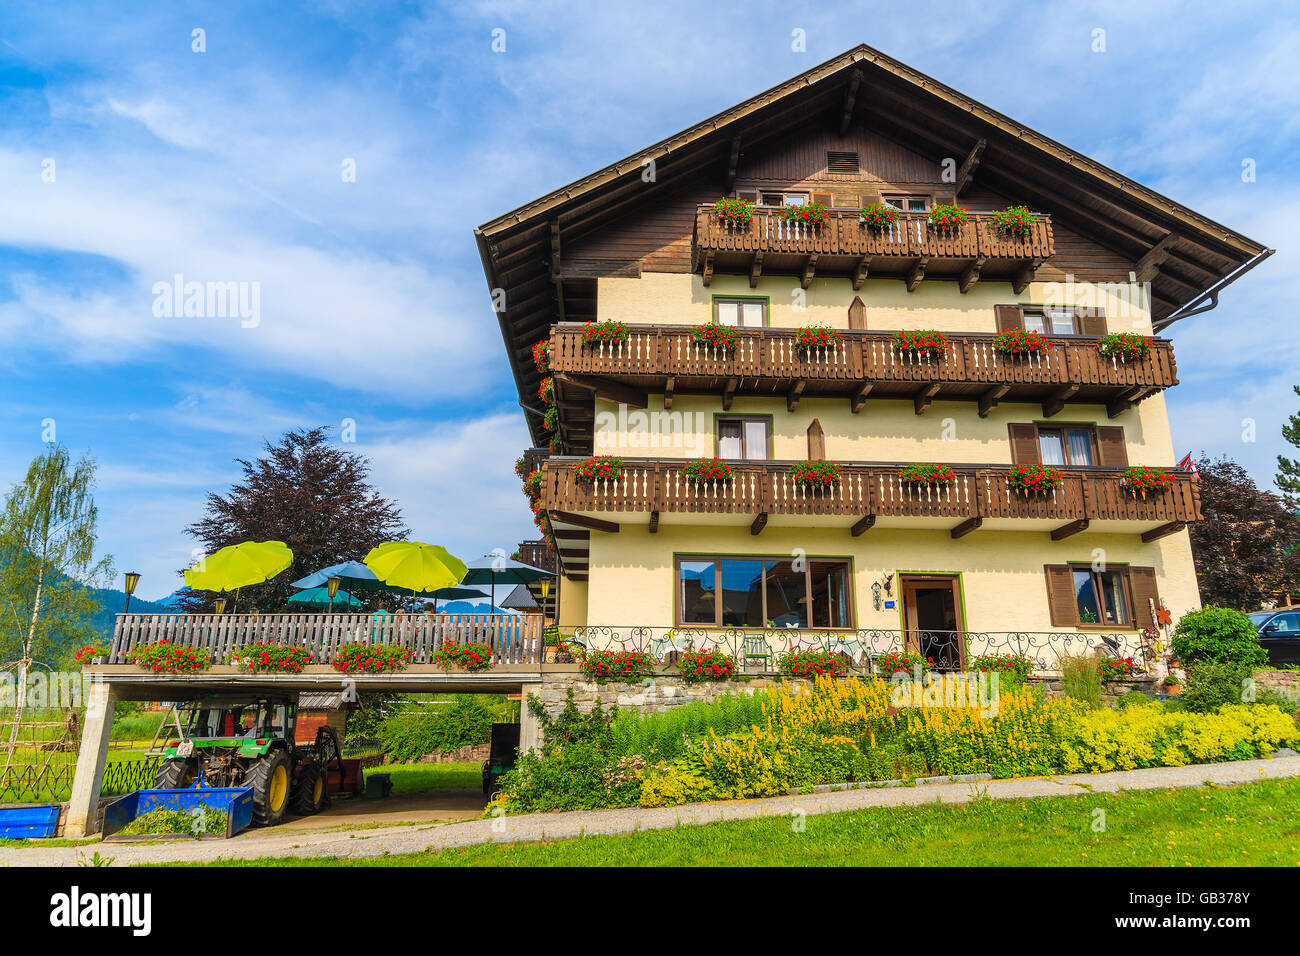 WEISSENSEE LAKE, AUSTRIA - JUL 6, 2015: Typical alpine guest house on green meadow in summer landscape of Weissensee lake, Austr Stock Photo